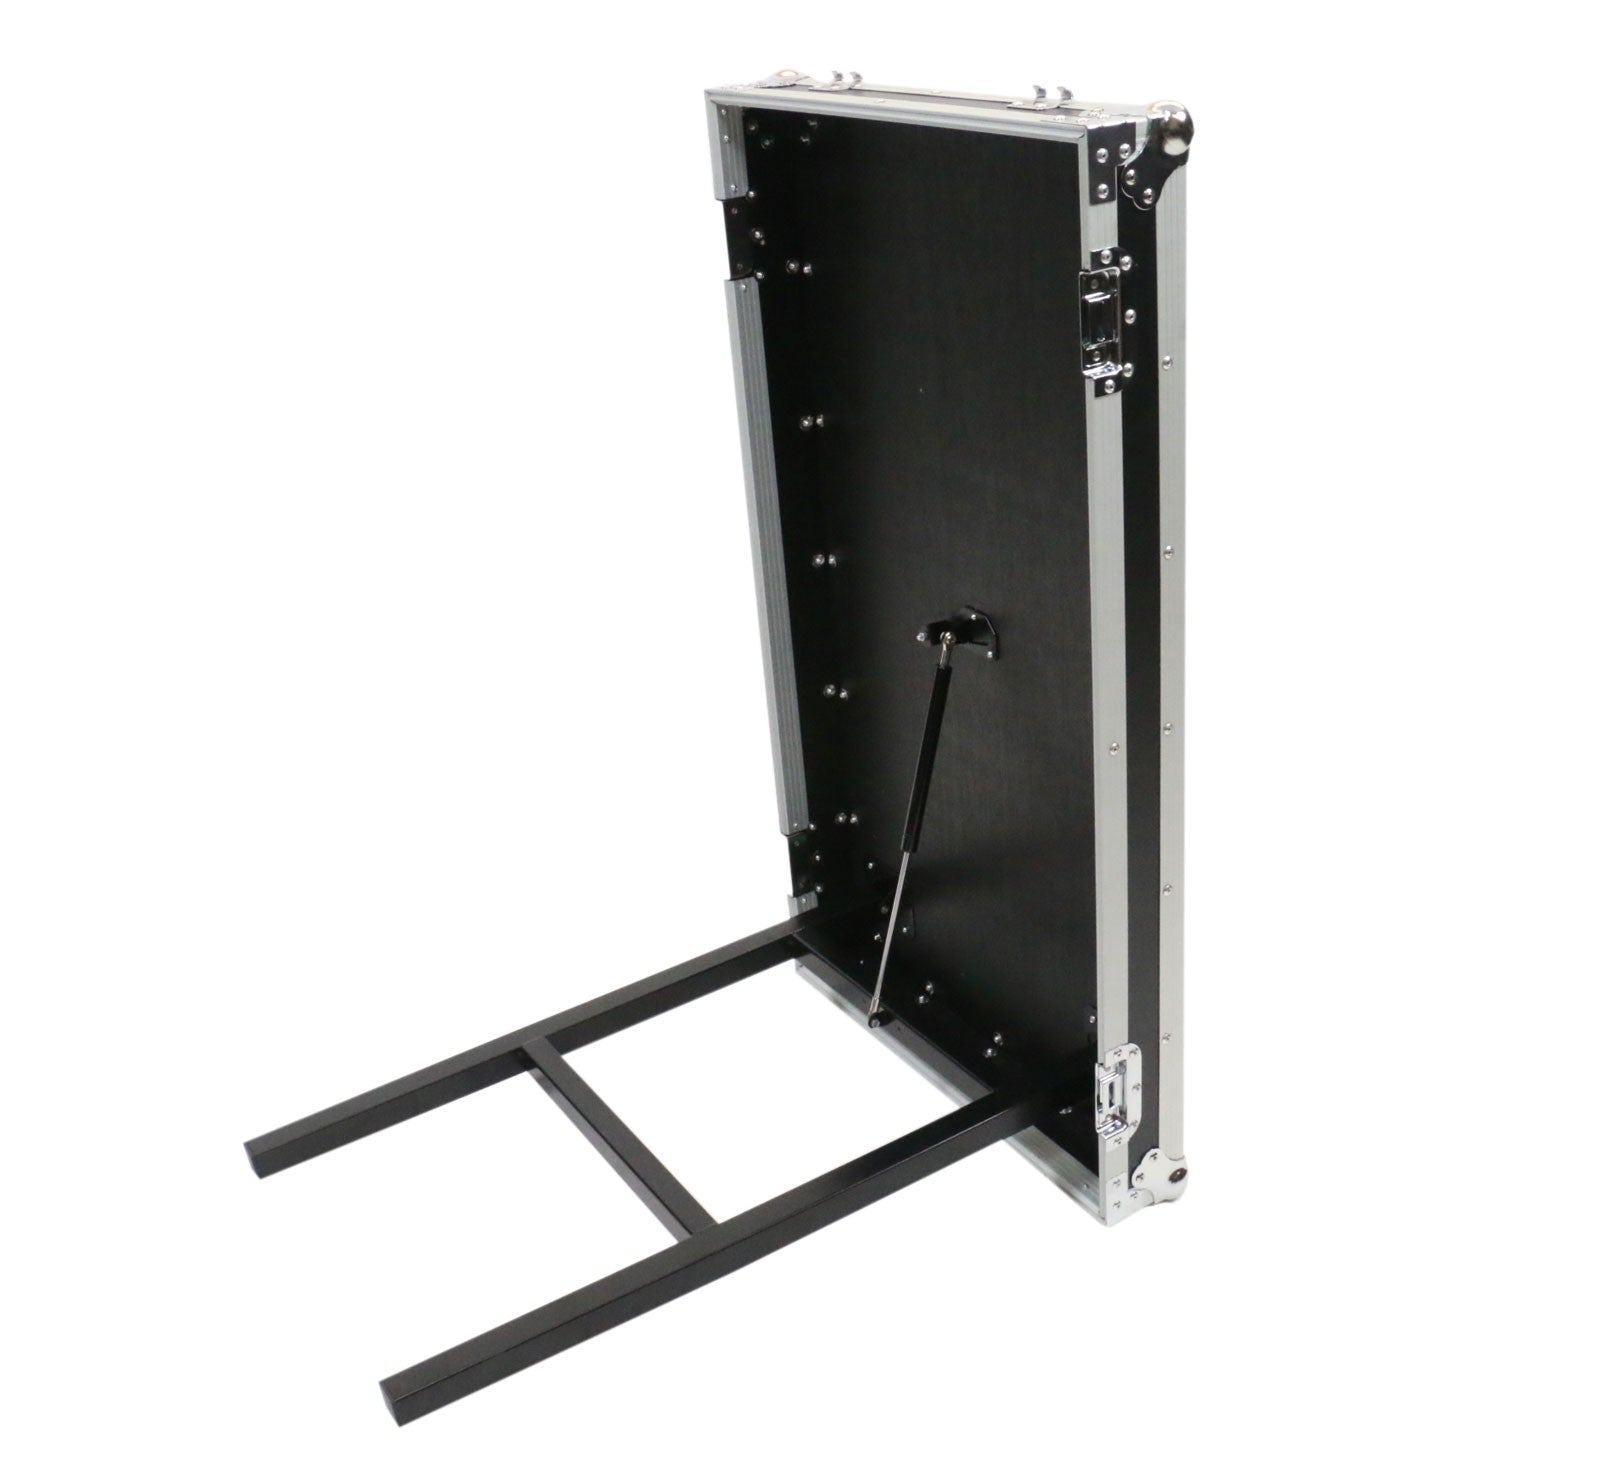 OSP RC20U-20SL 20 Space ATA Amp Rack w/Casters and Attached Utility Table